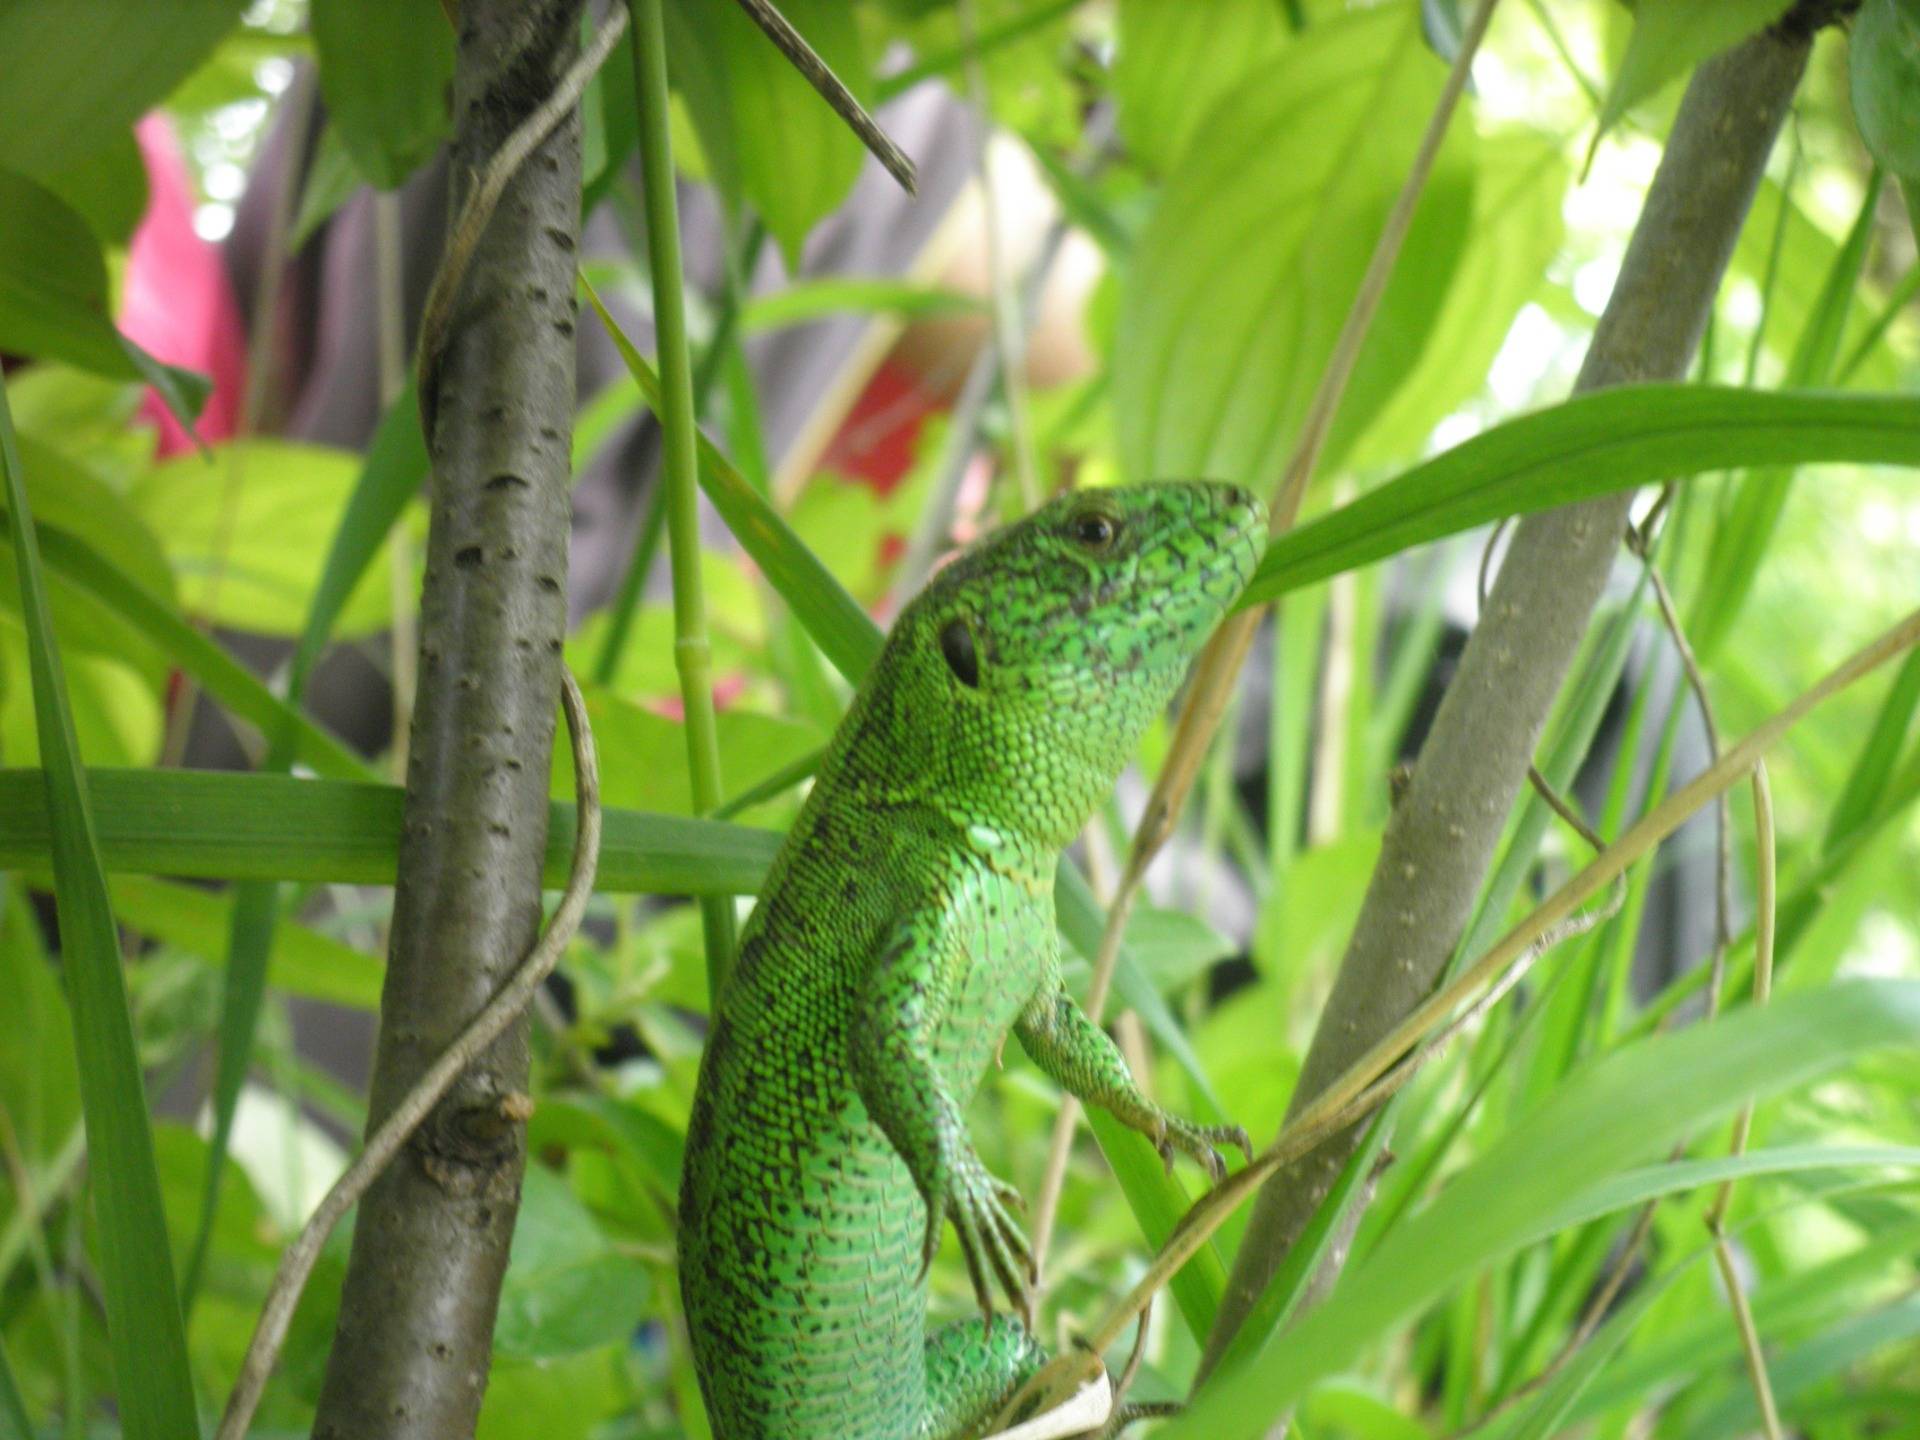 This green lizard would look more natural in the jungle rather 